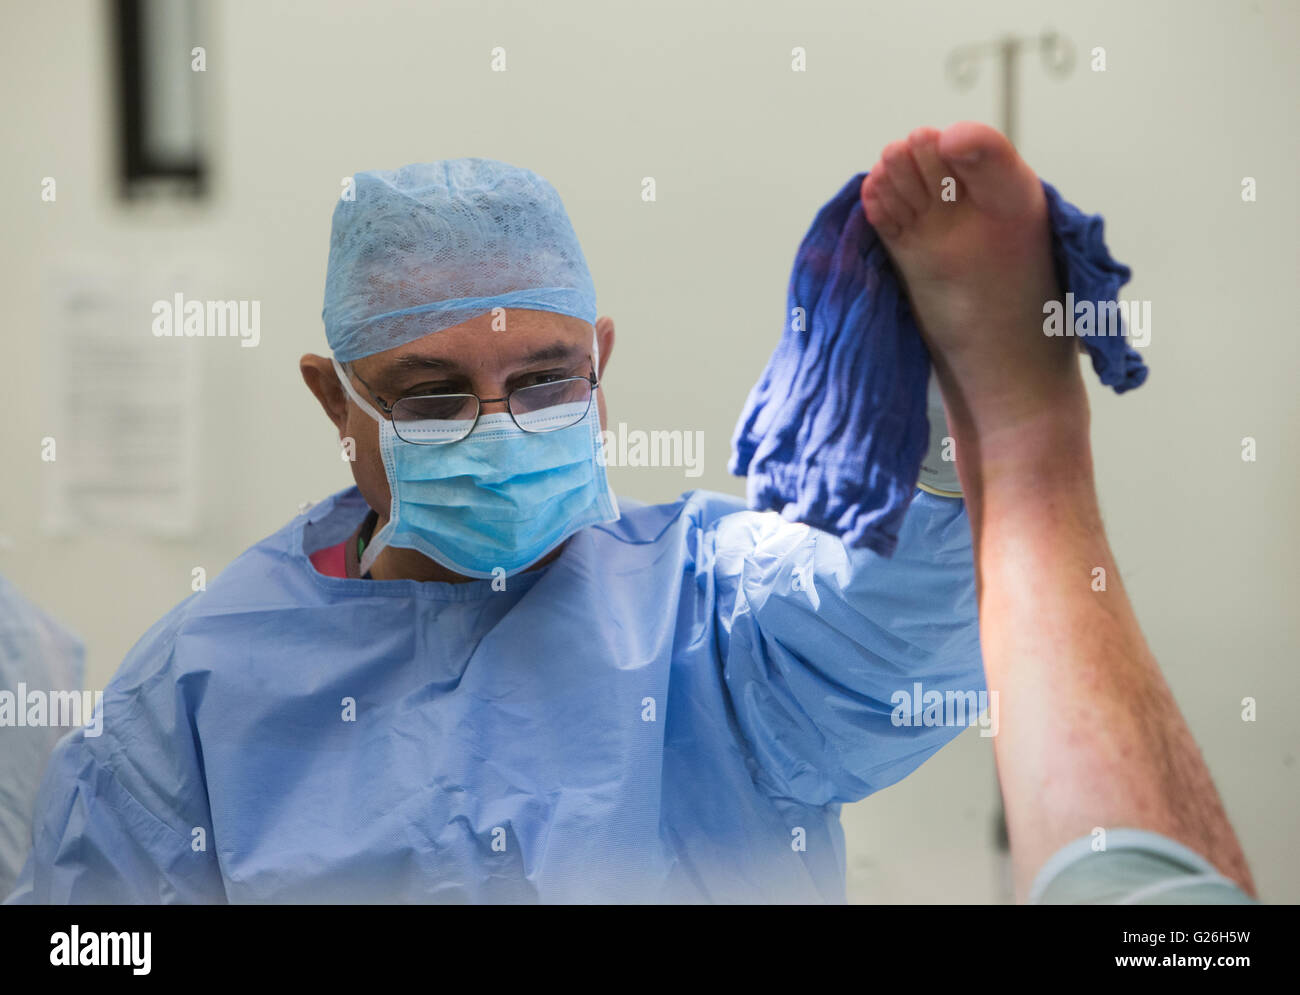 A surgeon prepares a patient for surgery prior to performing an open reduction and internal fixation of a left ankle Stock Photo